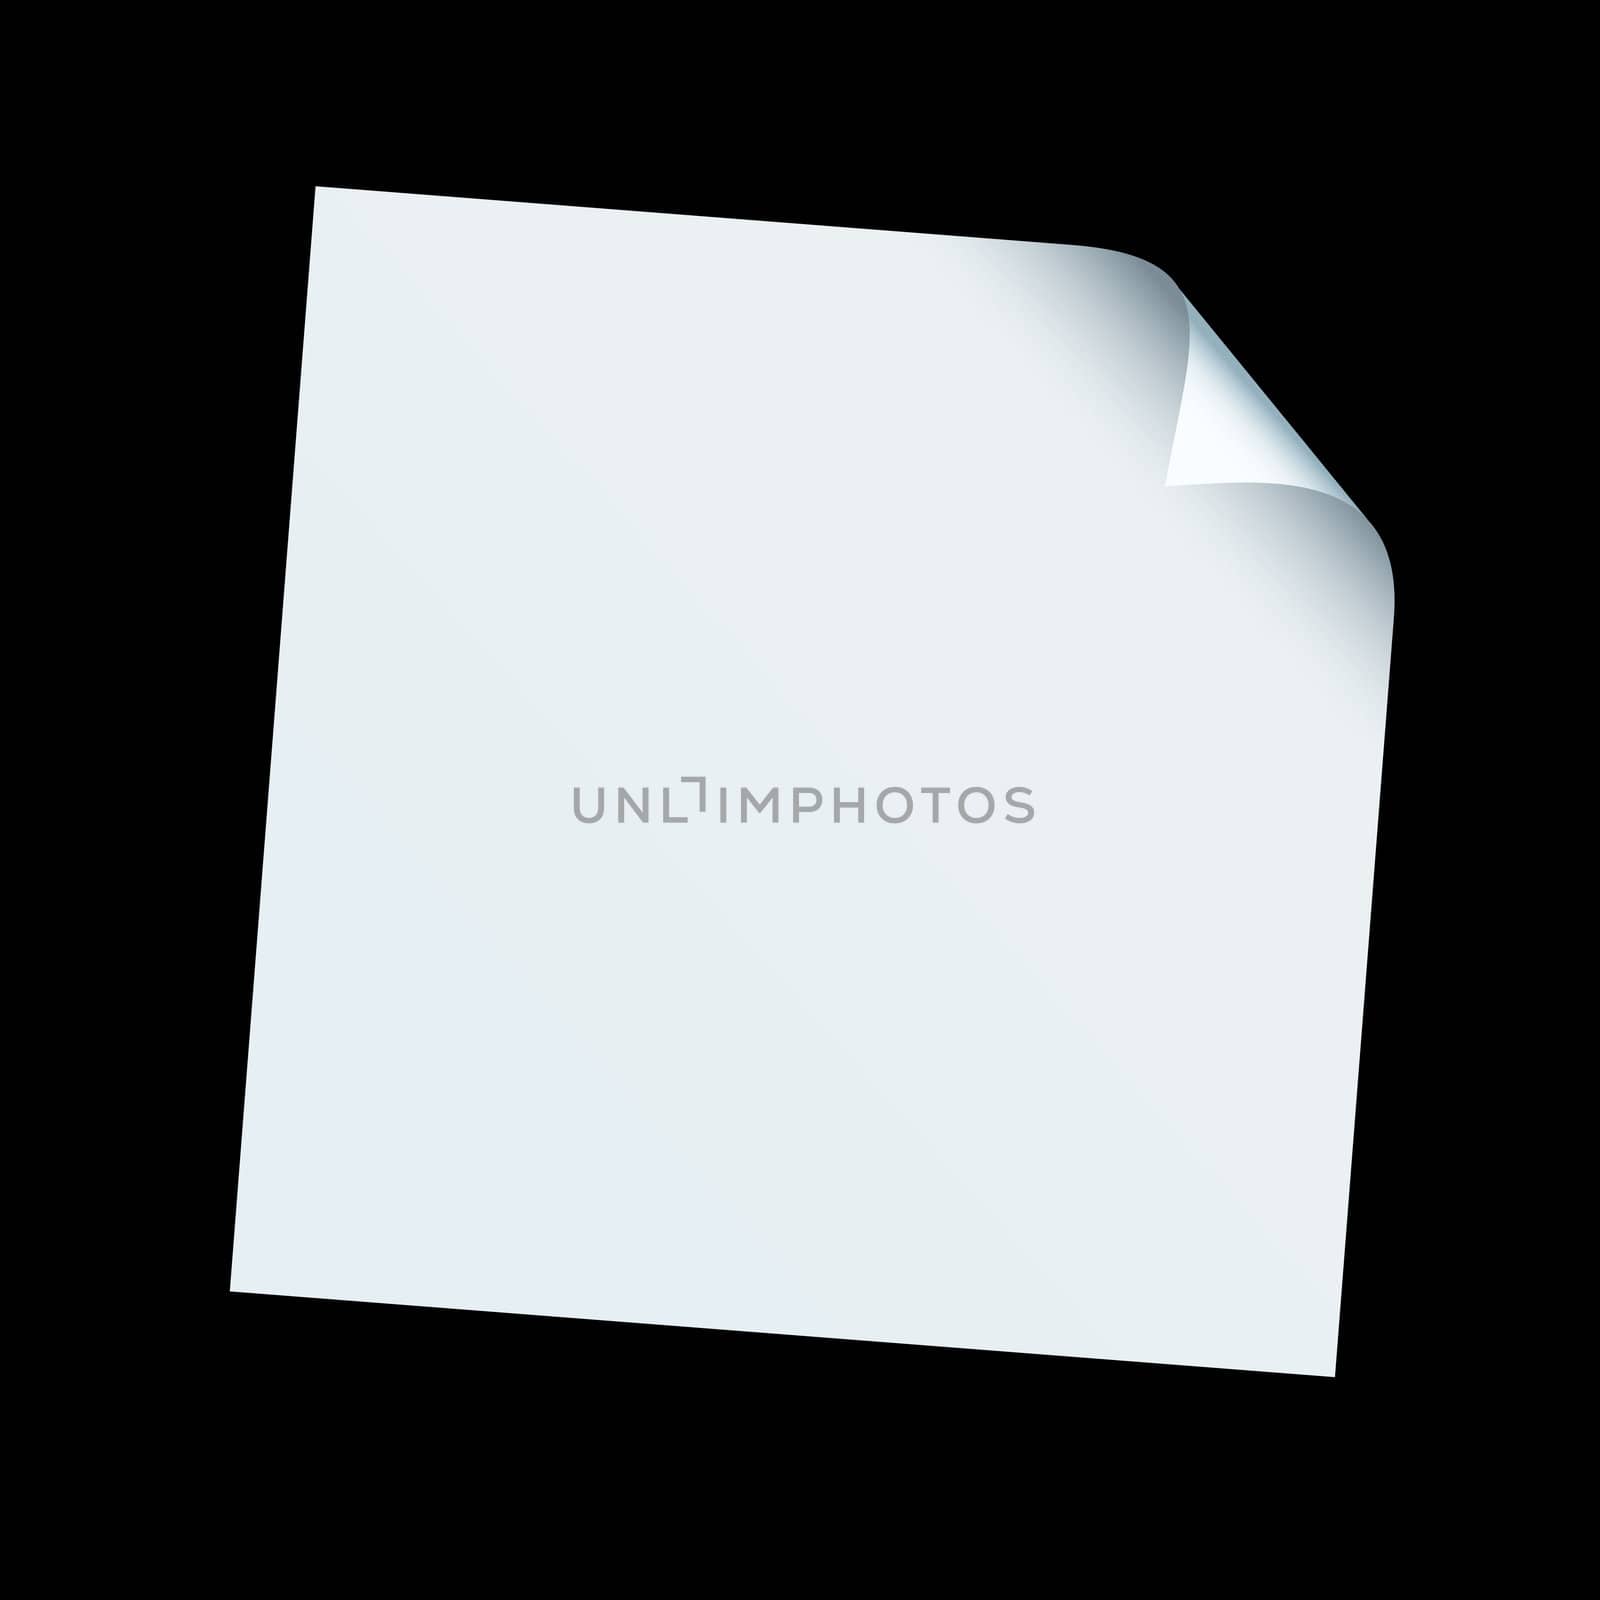 White piece of square paper with its edge curled over on a black background